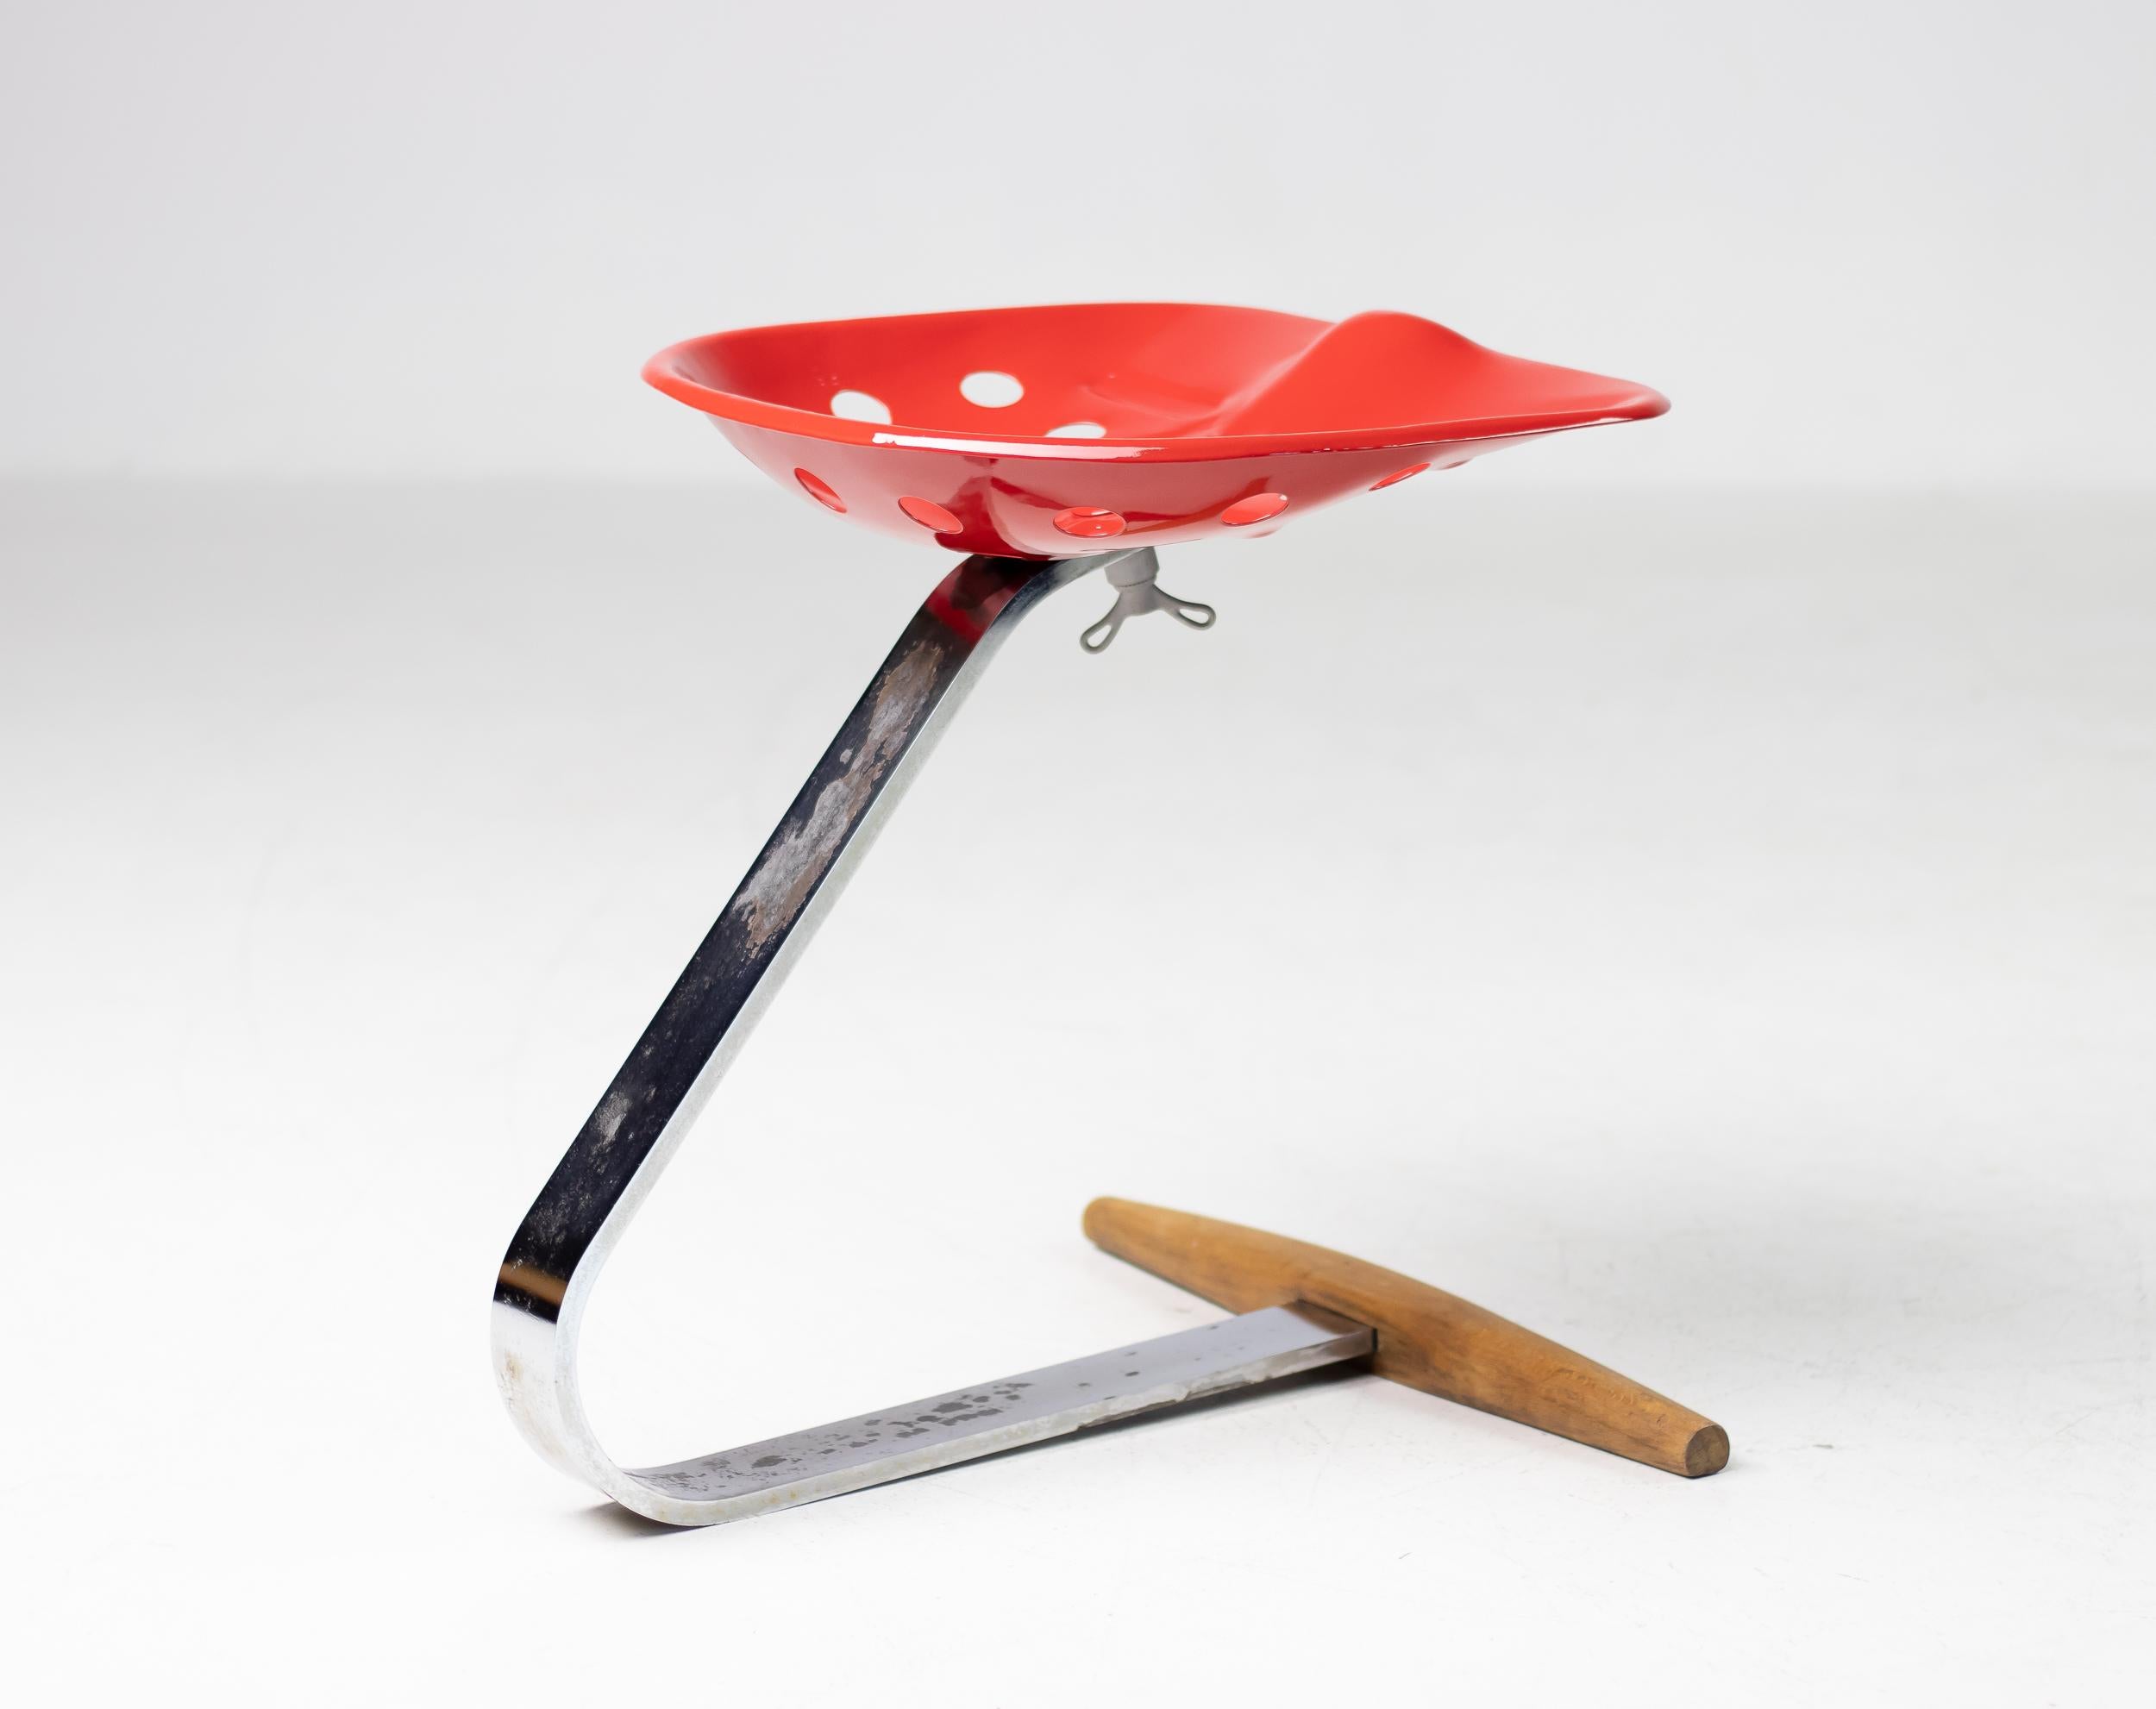 Very early bright red Mezzadro stool designed by Achille Castiglioni for Zanotta.
In the hands of the Castiglioni Brothers, the Mezzadro stool for Zanotta transforms a simple tractor seat into an iconic object, altering the history of design and the